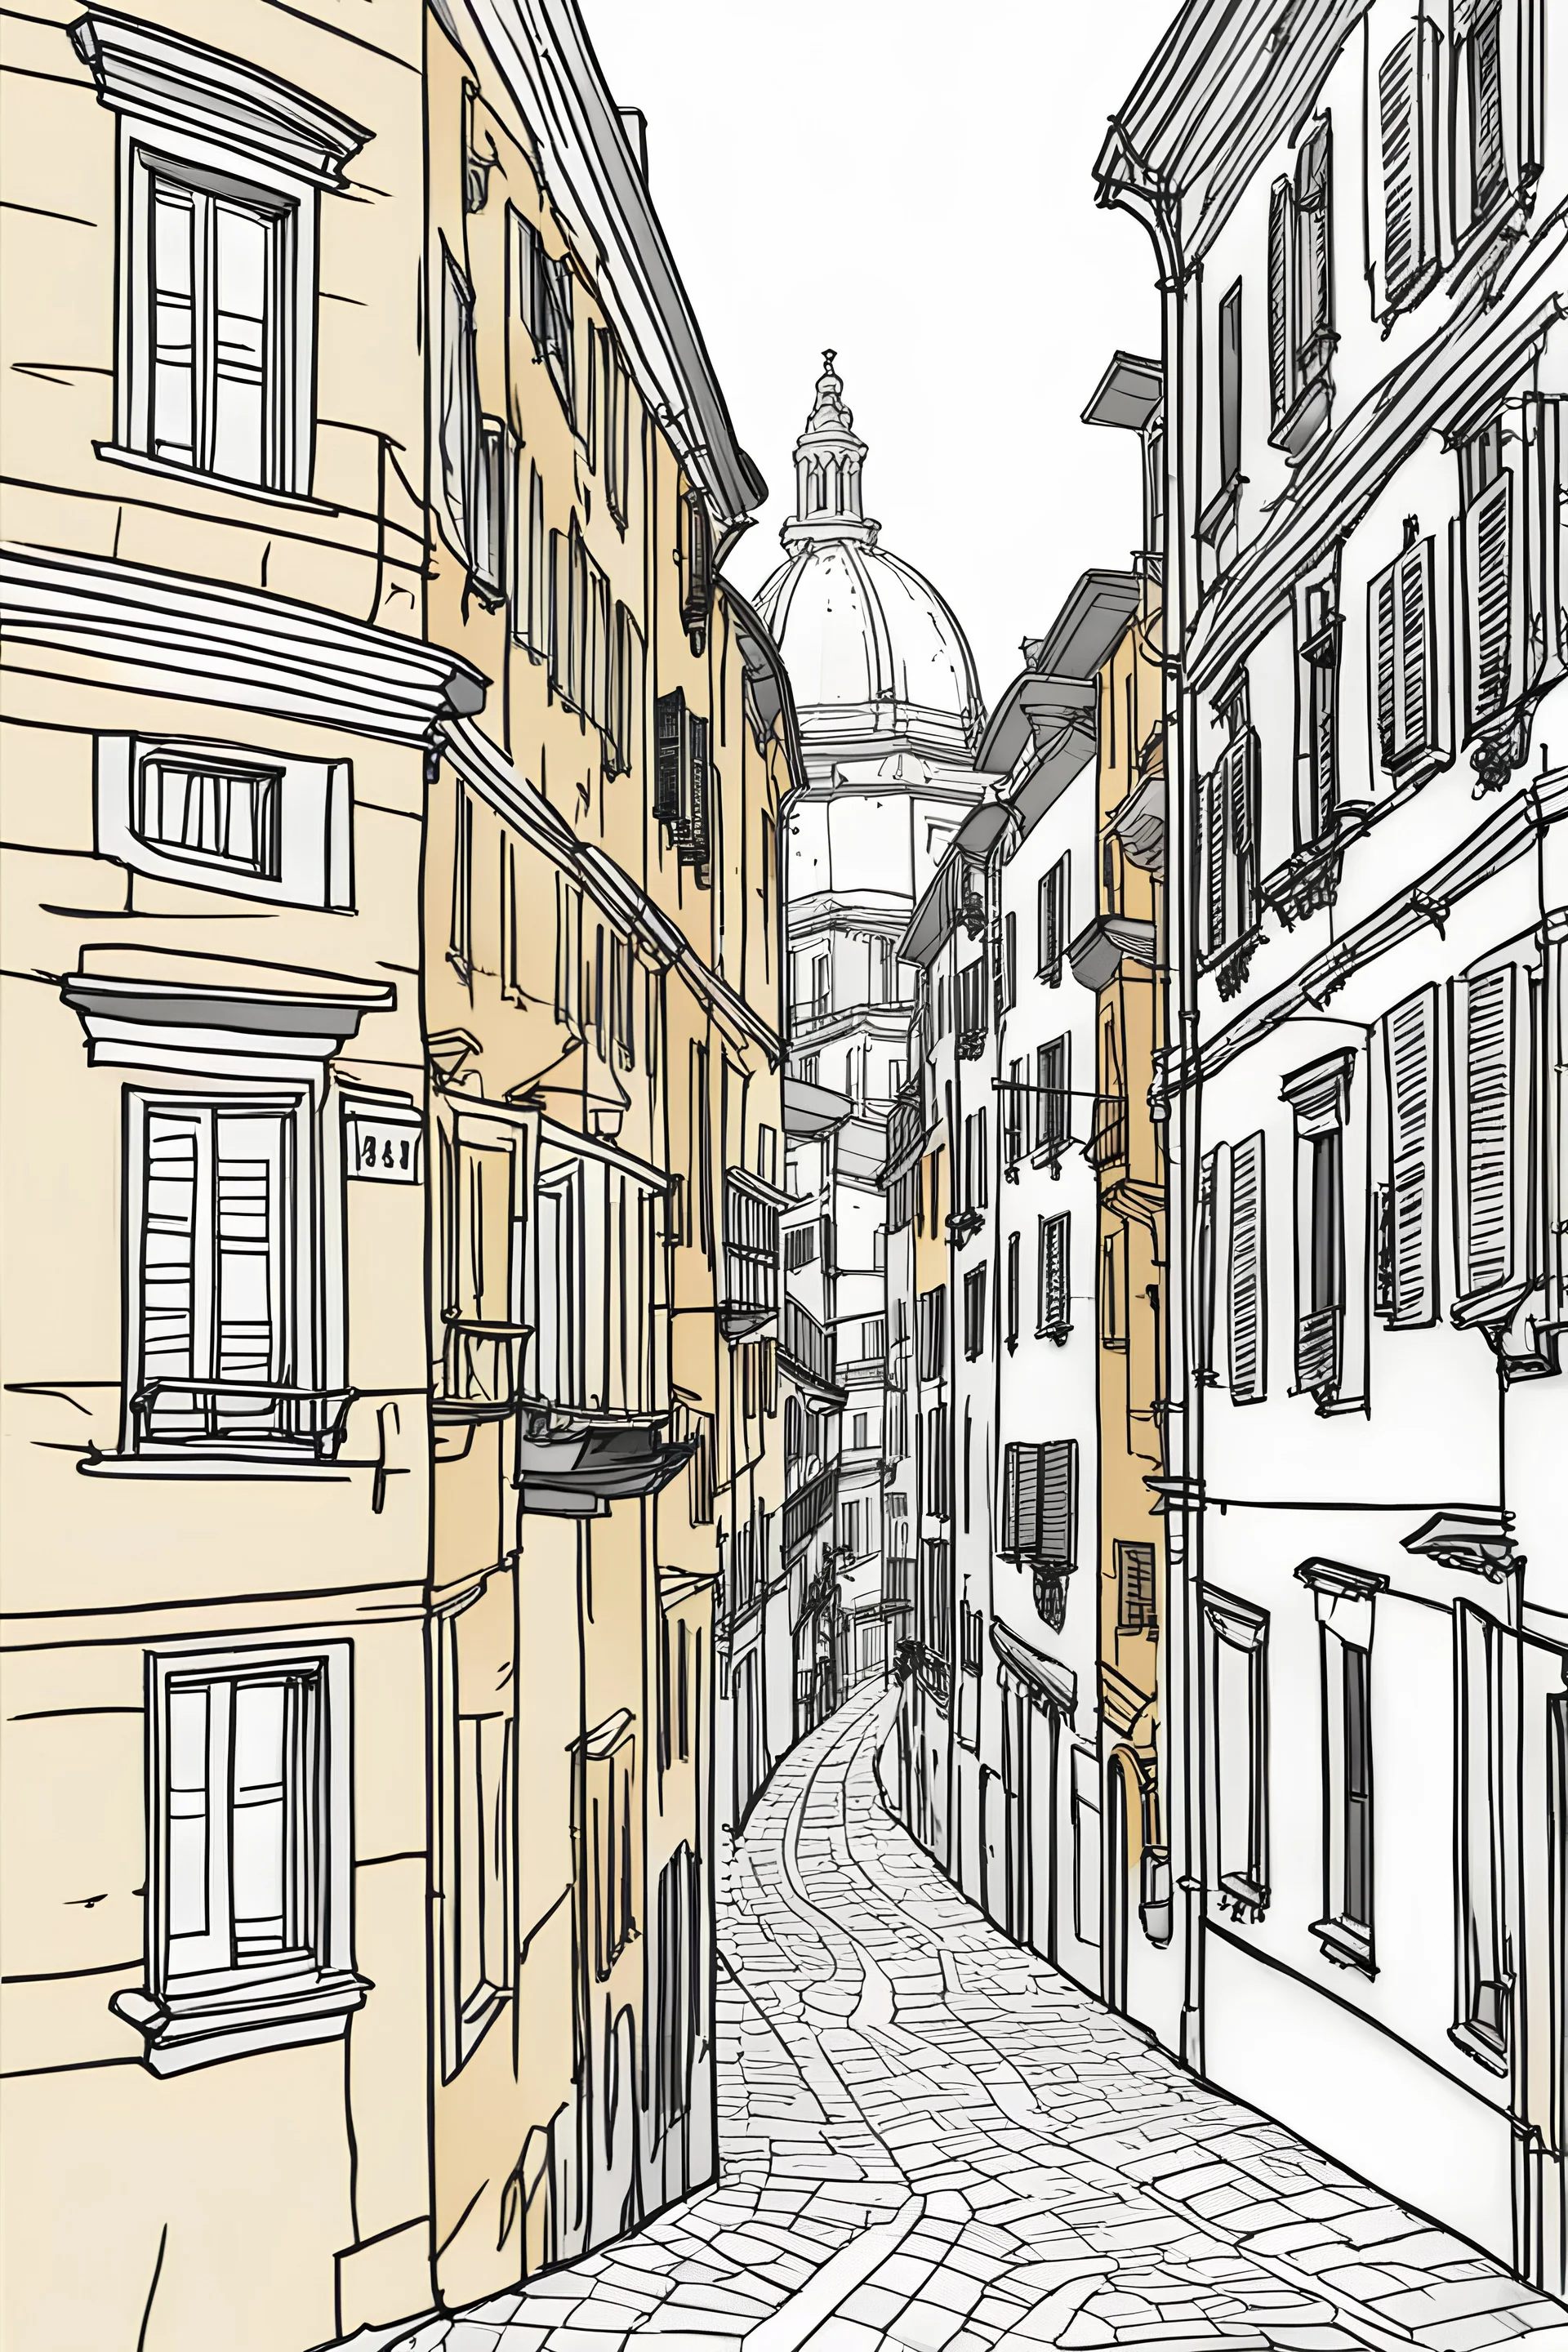 Imagine crafting a clean and minimalist coloring page. Create an image that encapsulates the charm of Genova 's vibrant streets with a focus on unique architectural features and the lively atmosphere. Maintain simplicity by using only a white background and black lines, ensuring no other colors are present. Convey the joy and liveliness of wandering through the streets of this Italian city without people within the confines of a 9:11 aspect ratio